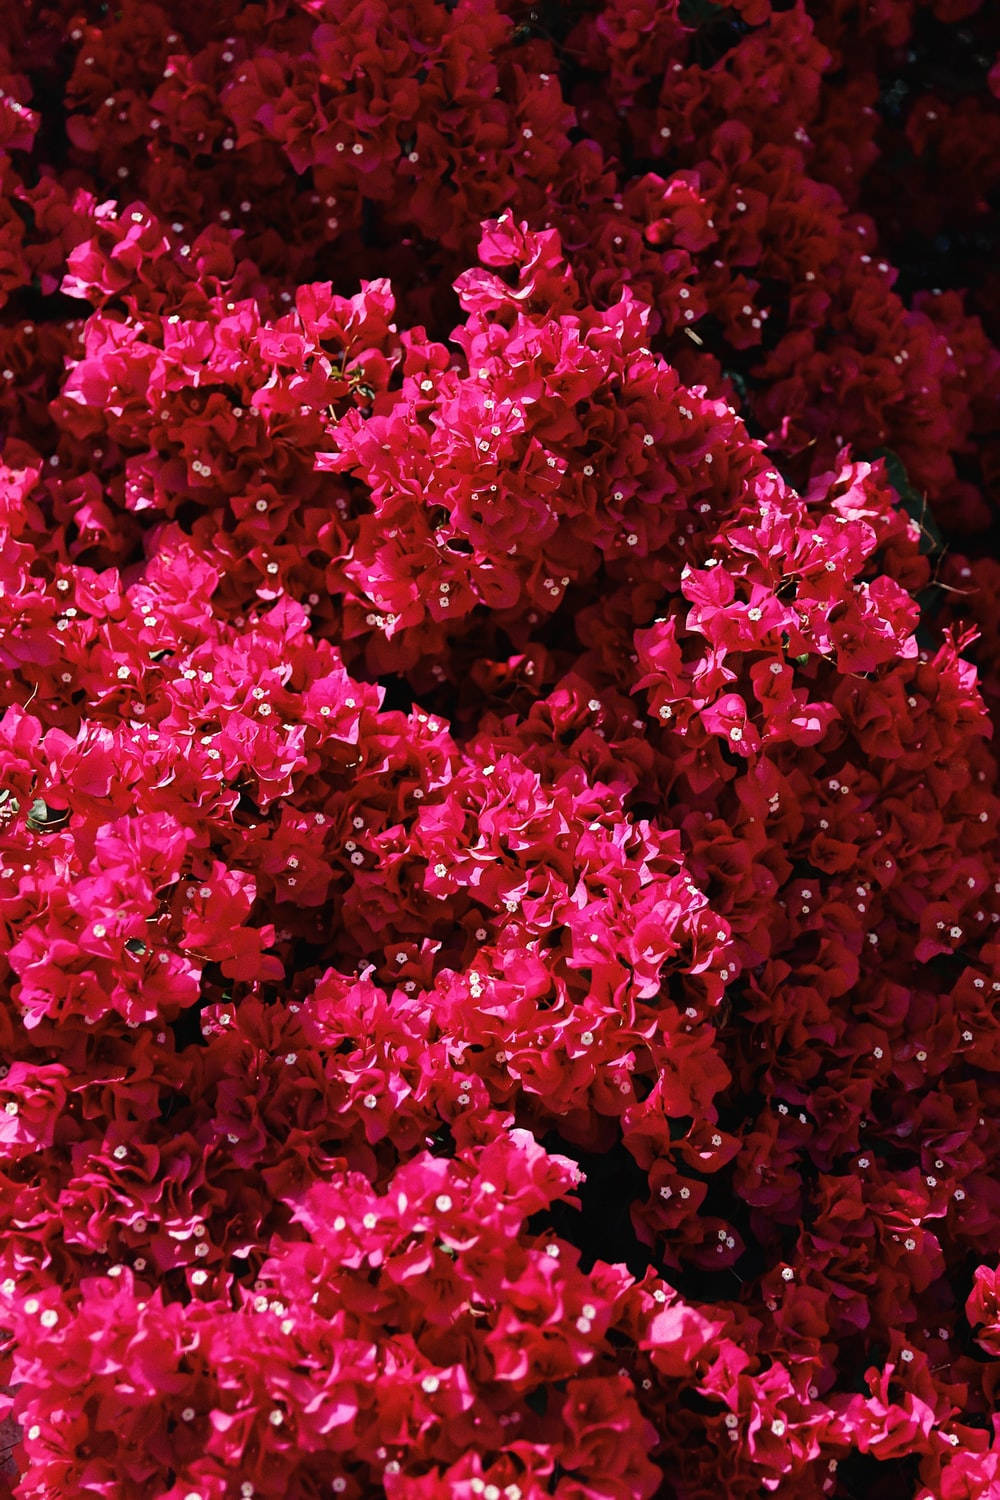 Violet Delight - A Stunning Display Of Bougainvillea Blooming Background